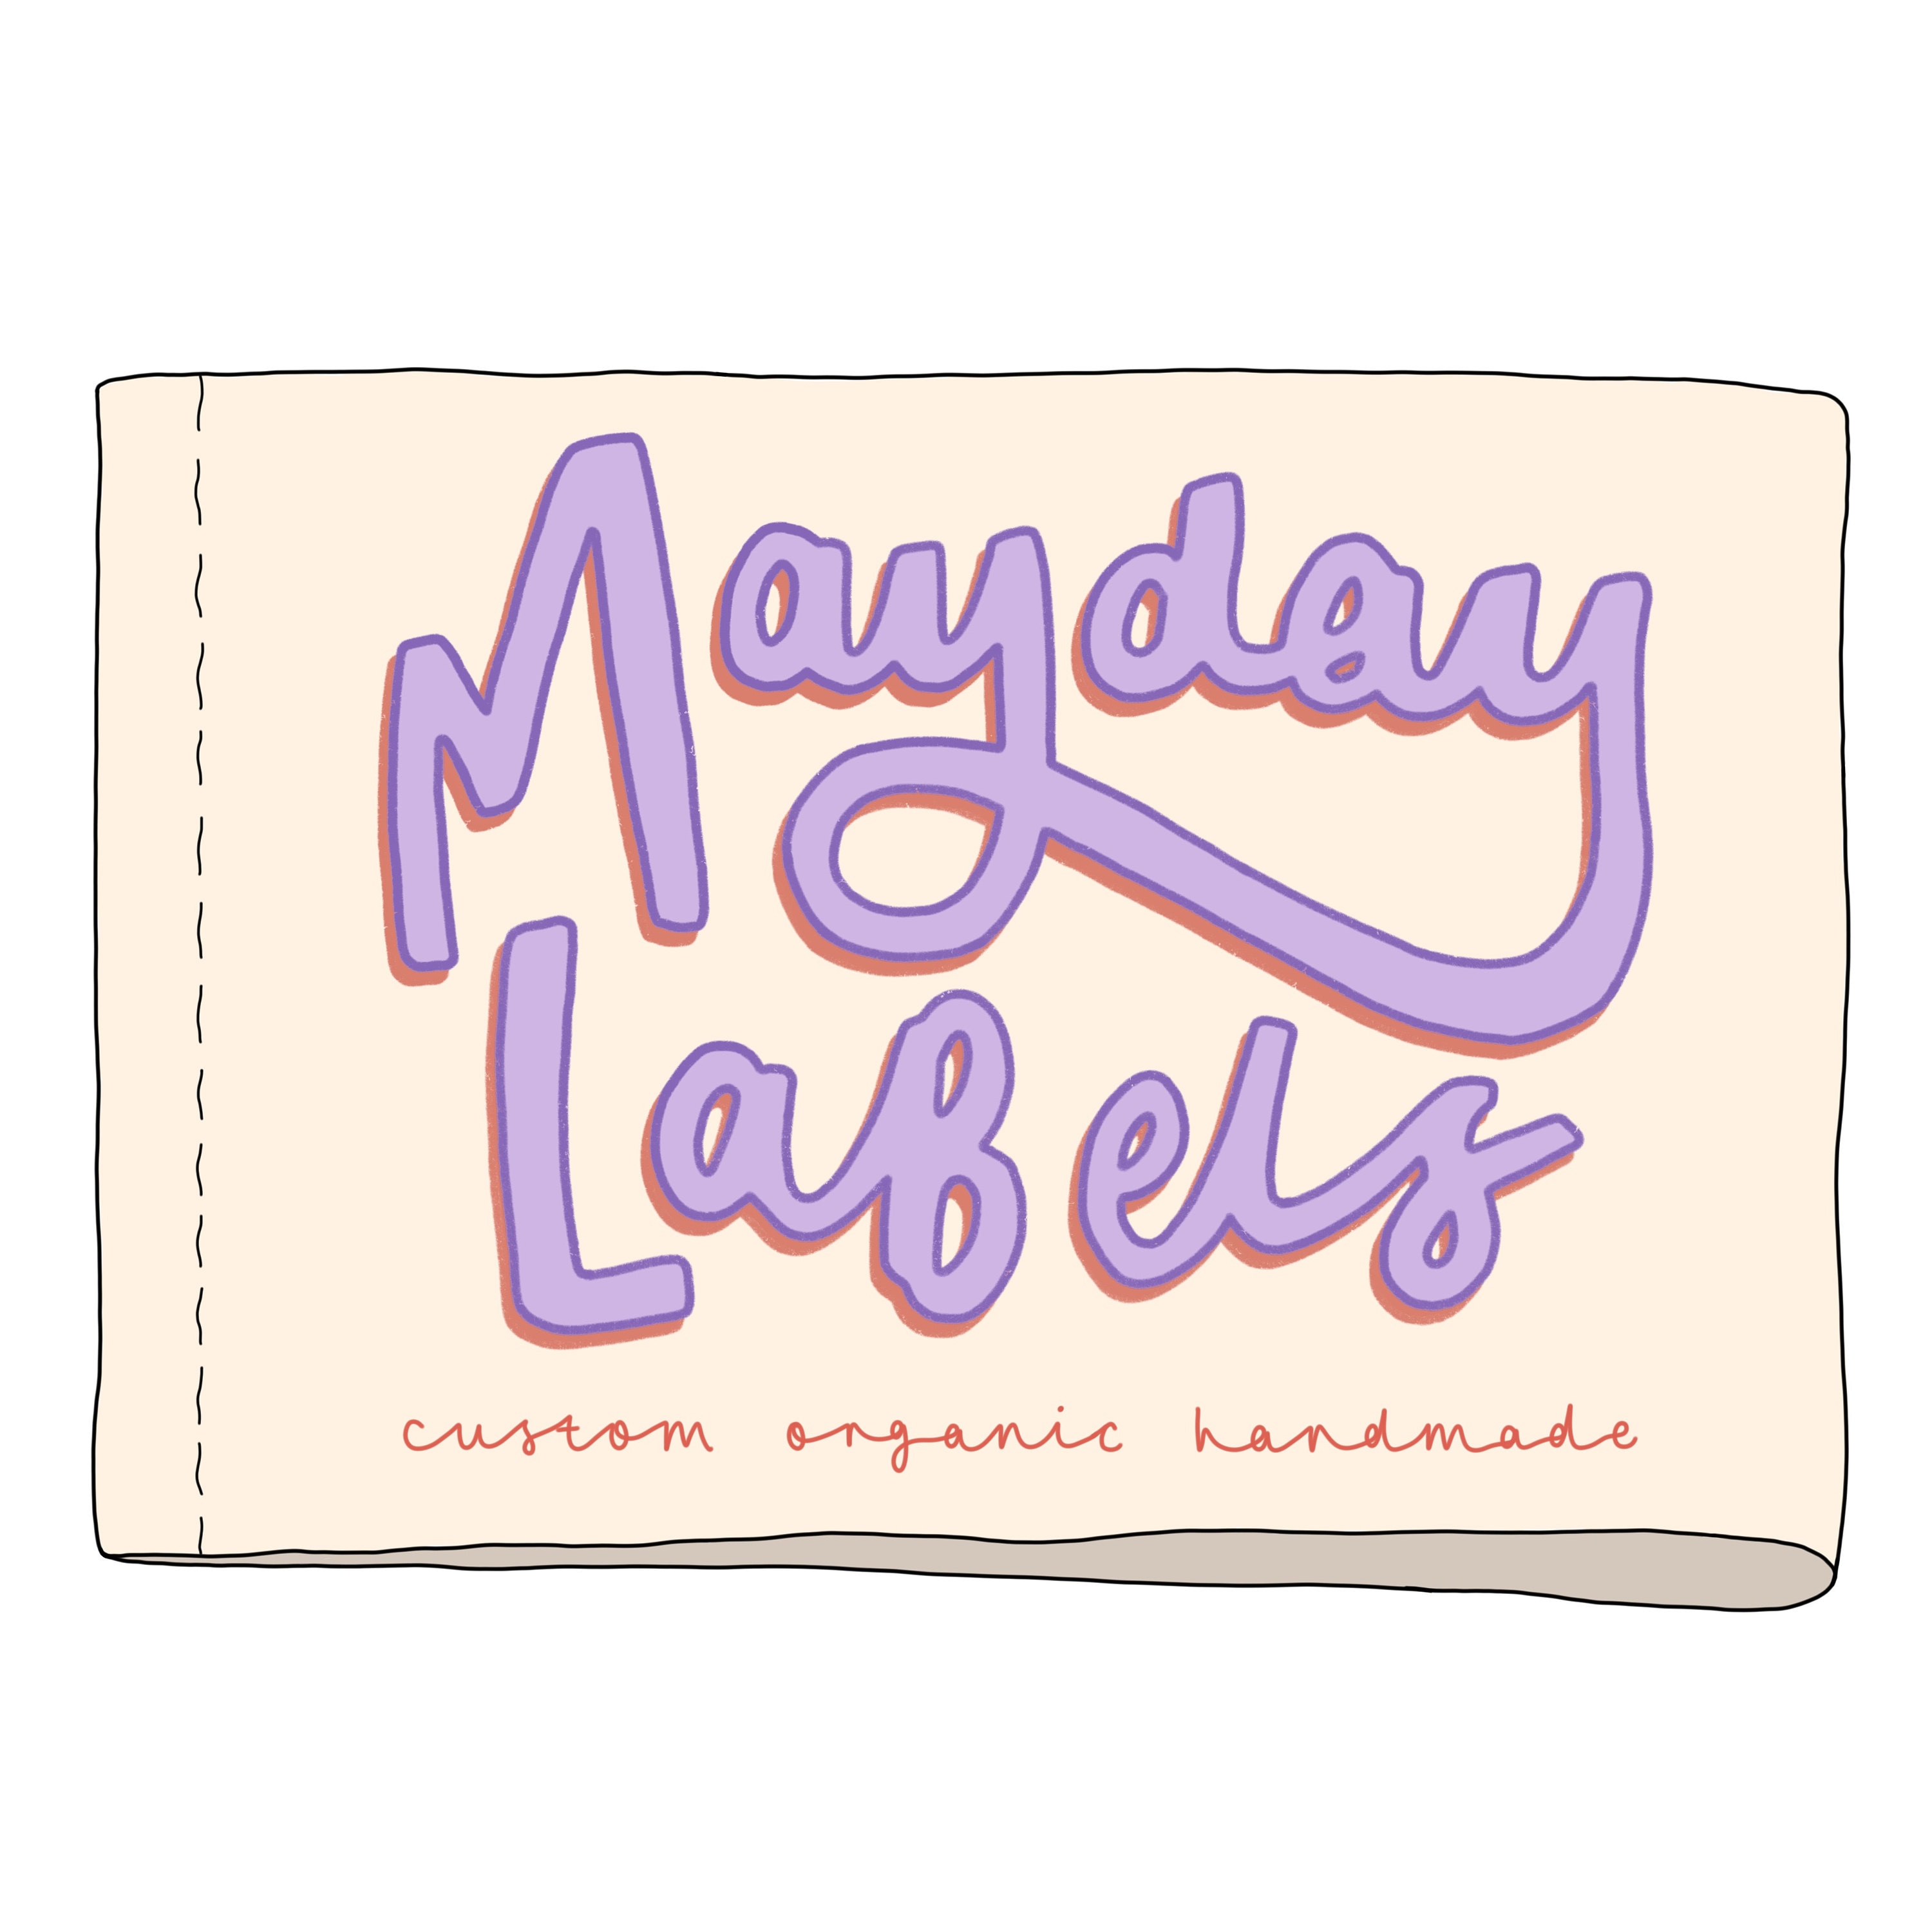 Handmade With Love By Labels (Knitting, Crochet, or Sewing Labels) -  personalized for handmade items, organic cotton